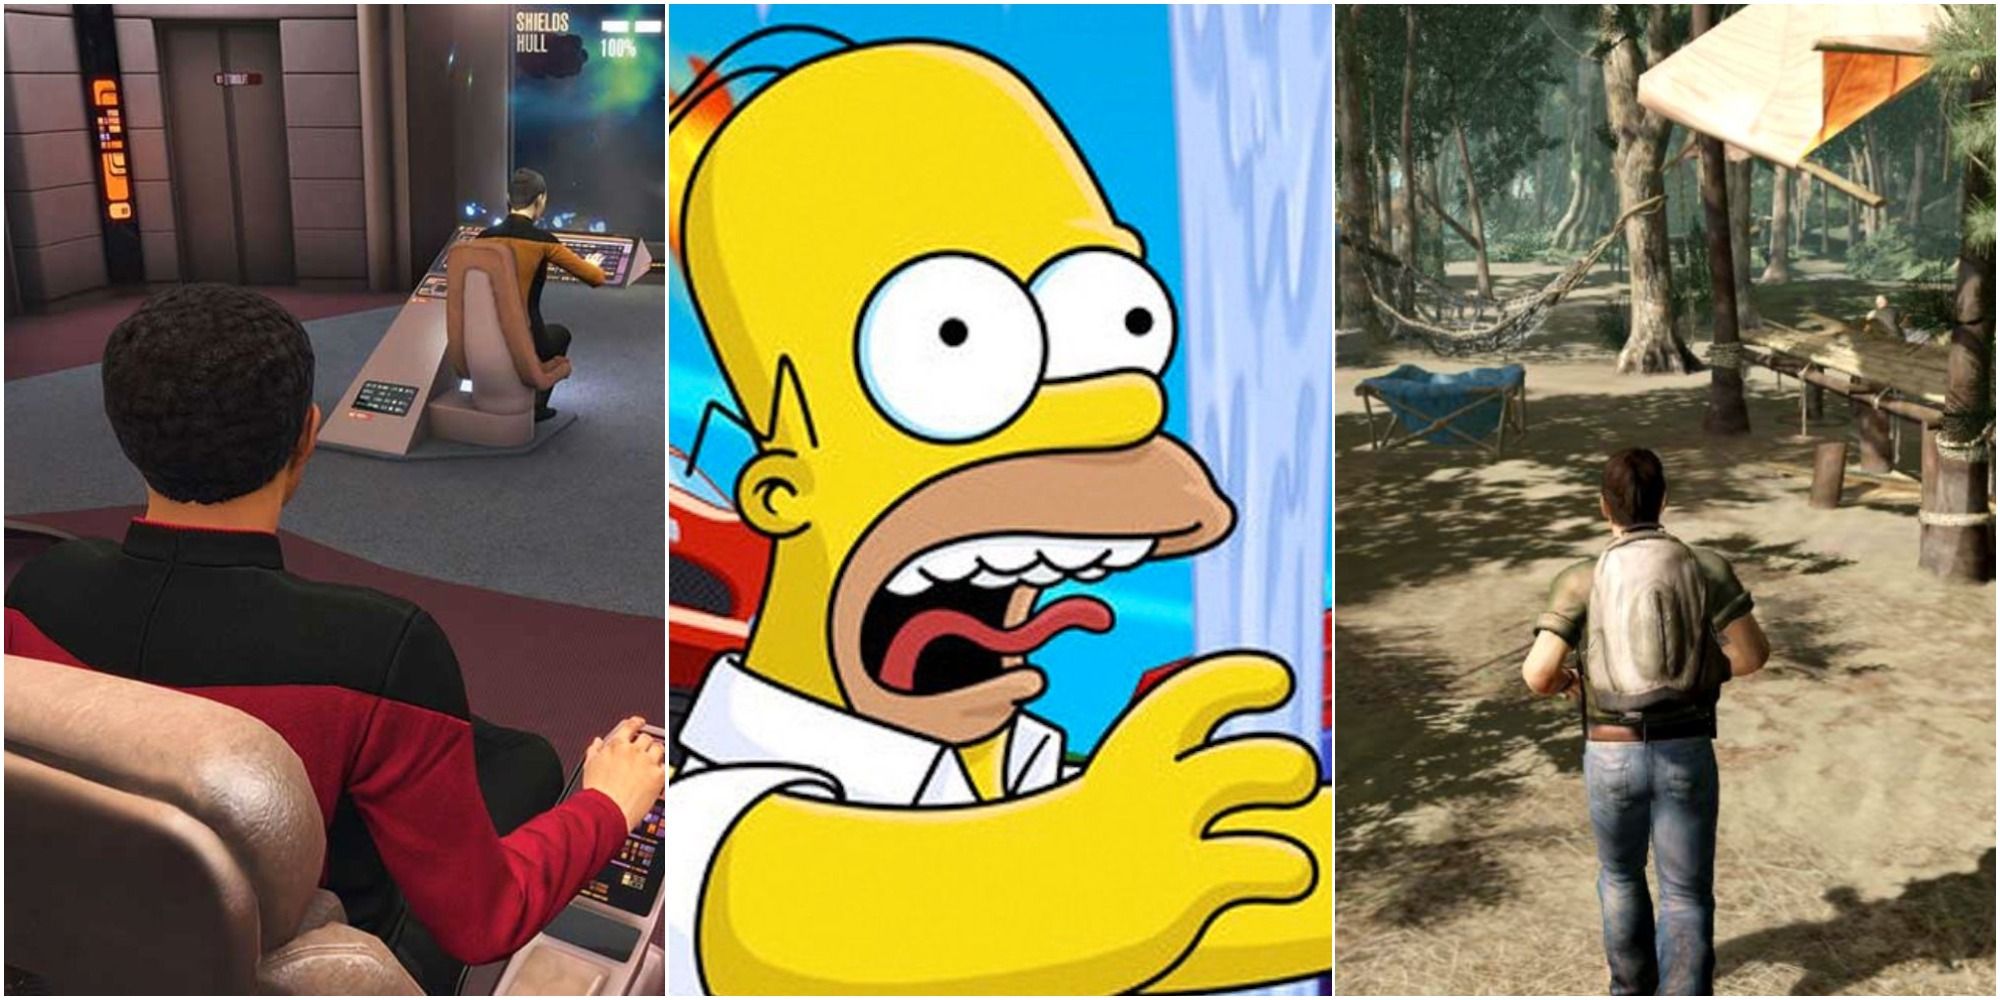 On the left is a screenshot from the game Star Trek: Bridge Crew, in the middle is a shot of Homer Simpson from the key art of The Simpsons: Hit & Run and on the right is Elliot from the game Lost: Via Domus